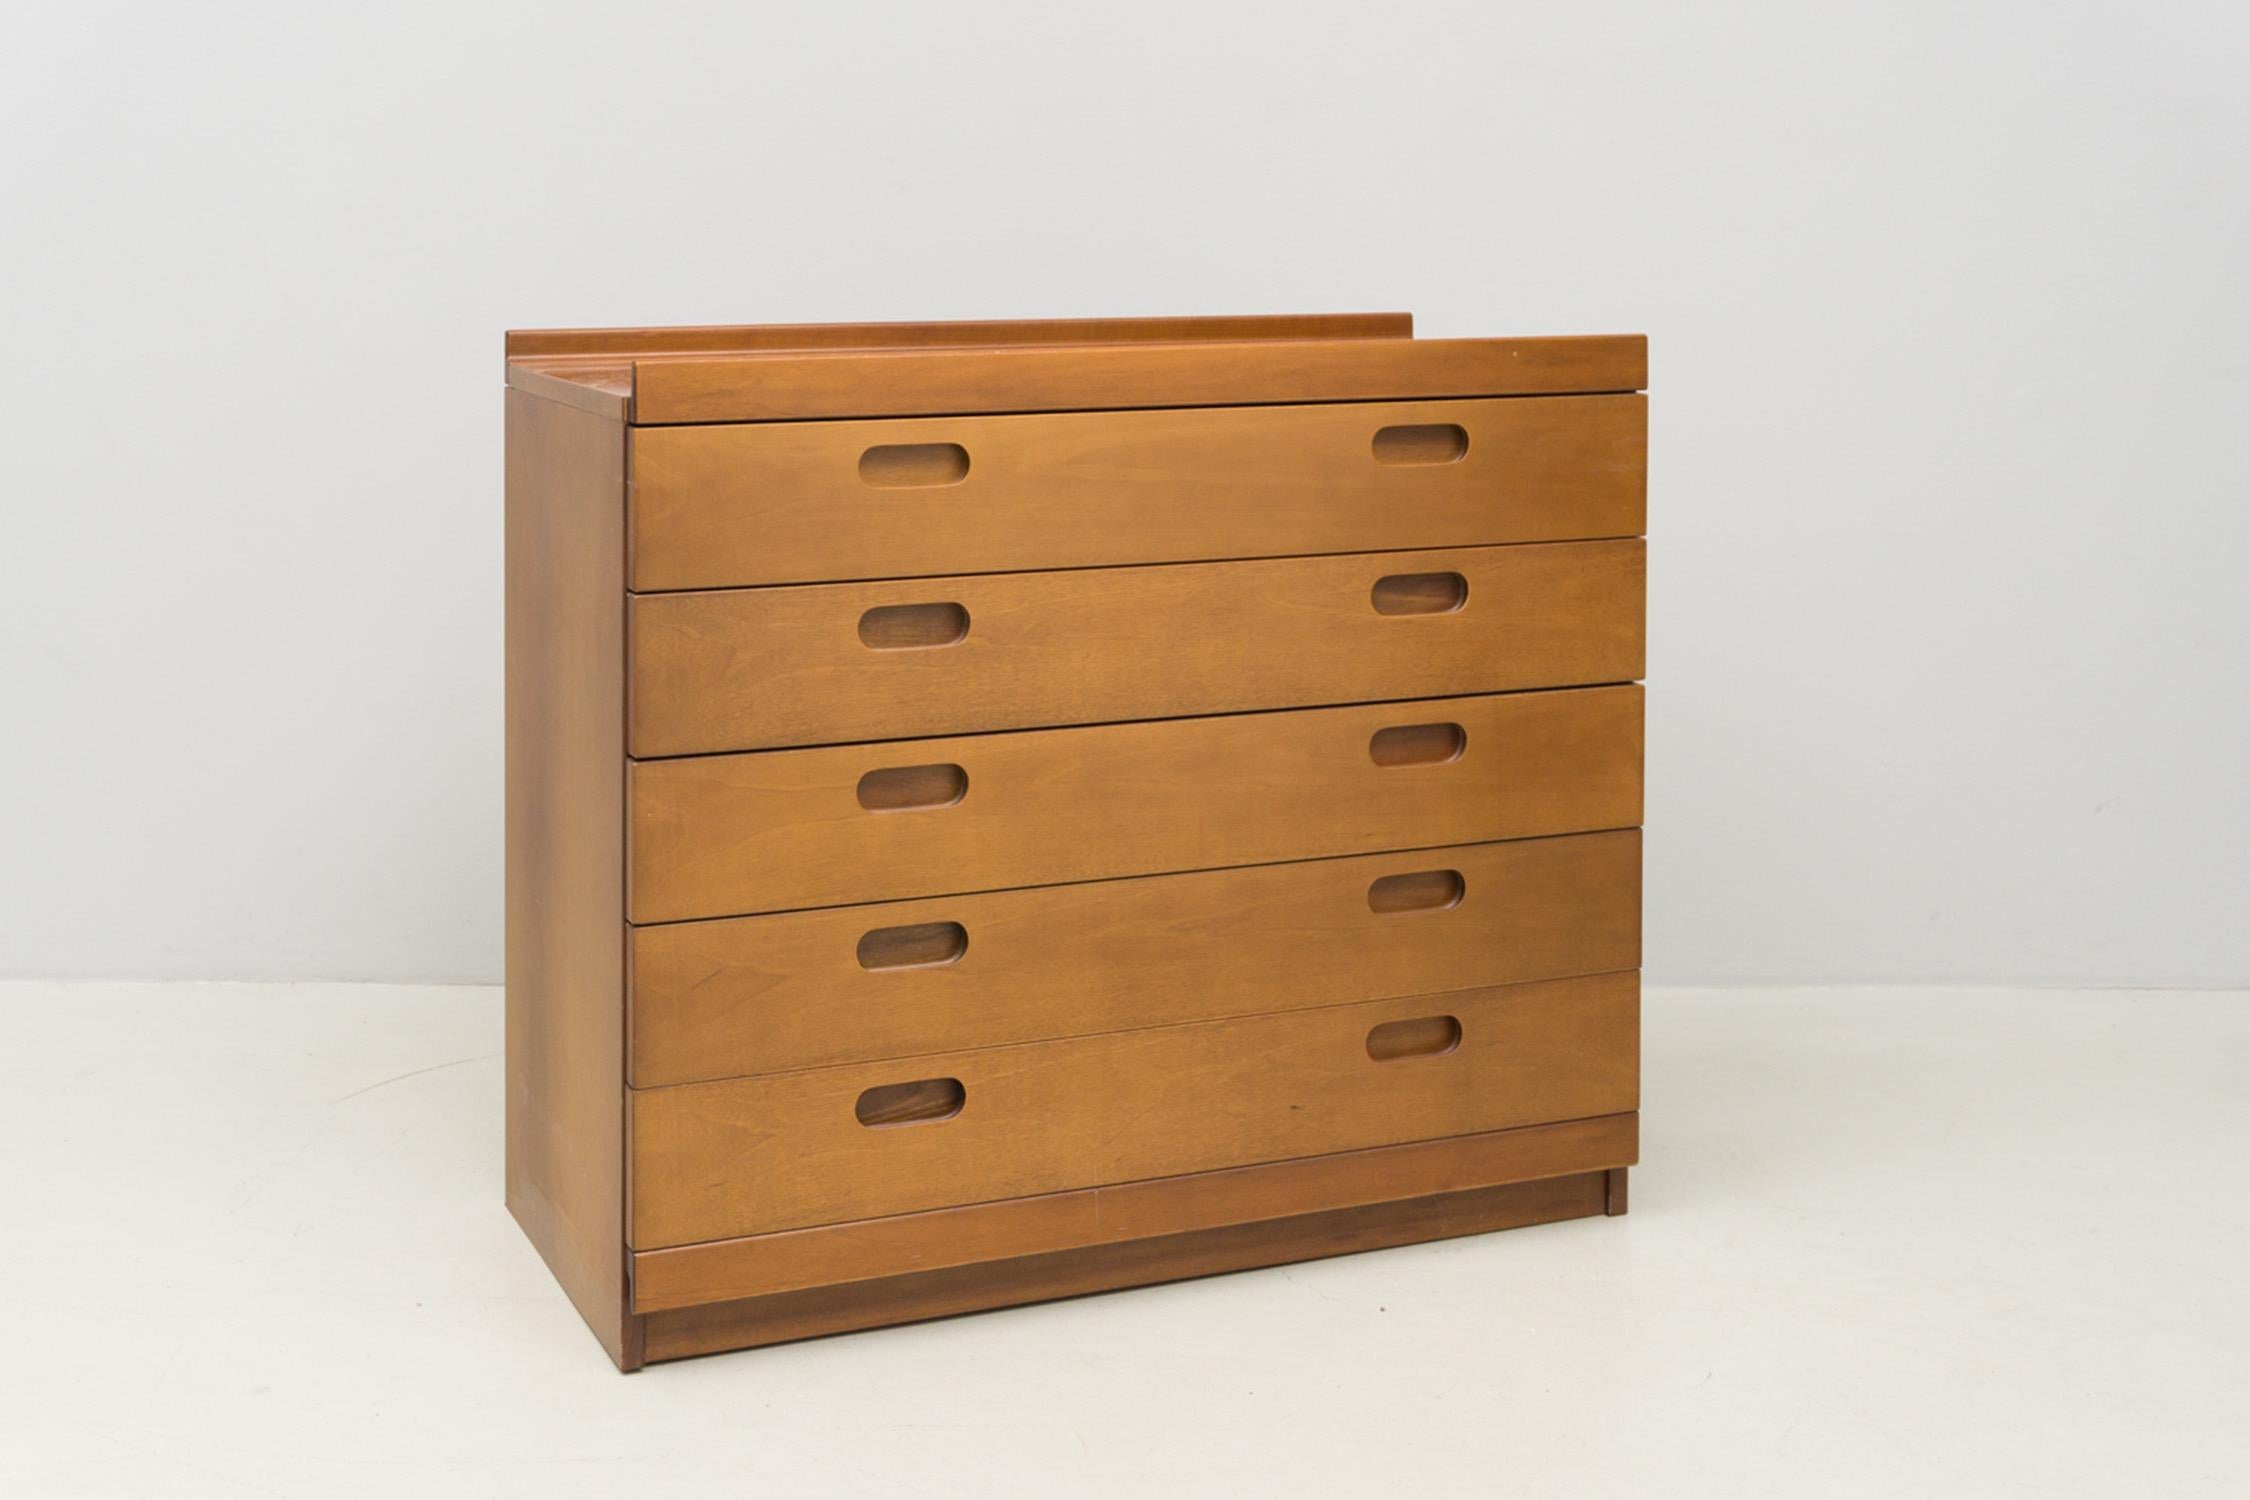 Chest of drawers made of solid walnut and laminated wood. Five drawers with elegant sunk in handles.
Designed by Tito Agnoli and manufactured by Meltoni in Italy.
 


